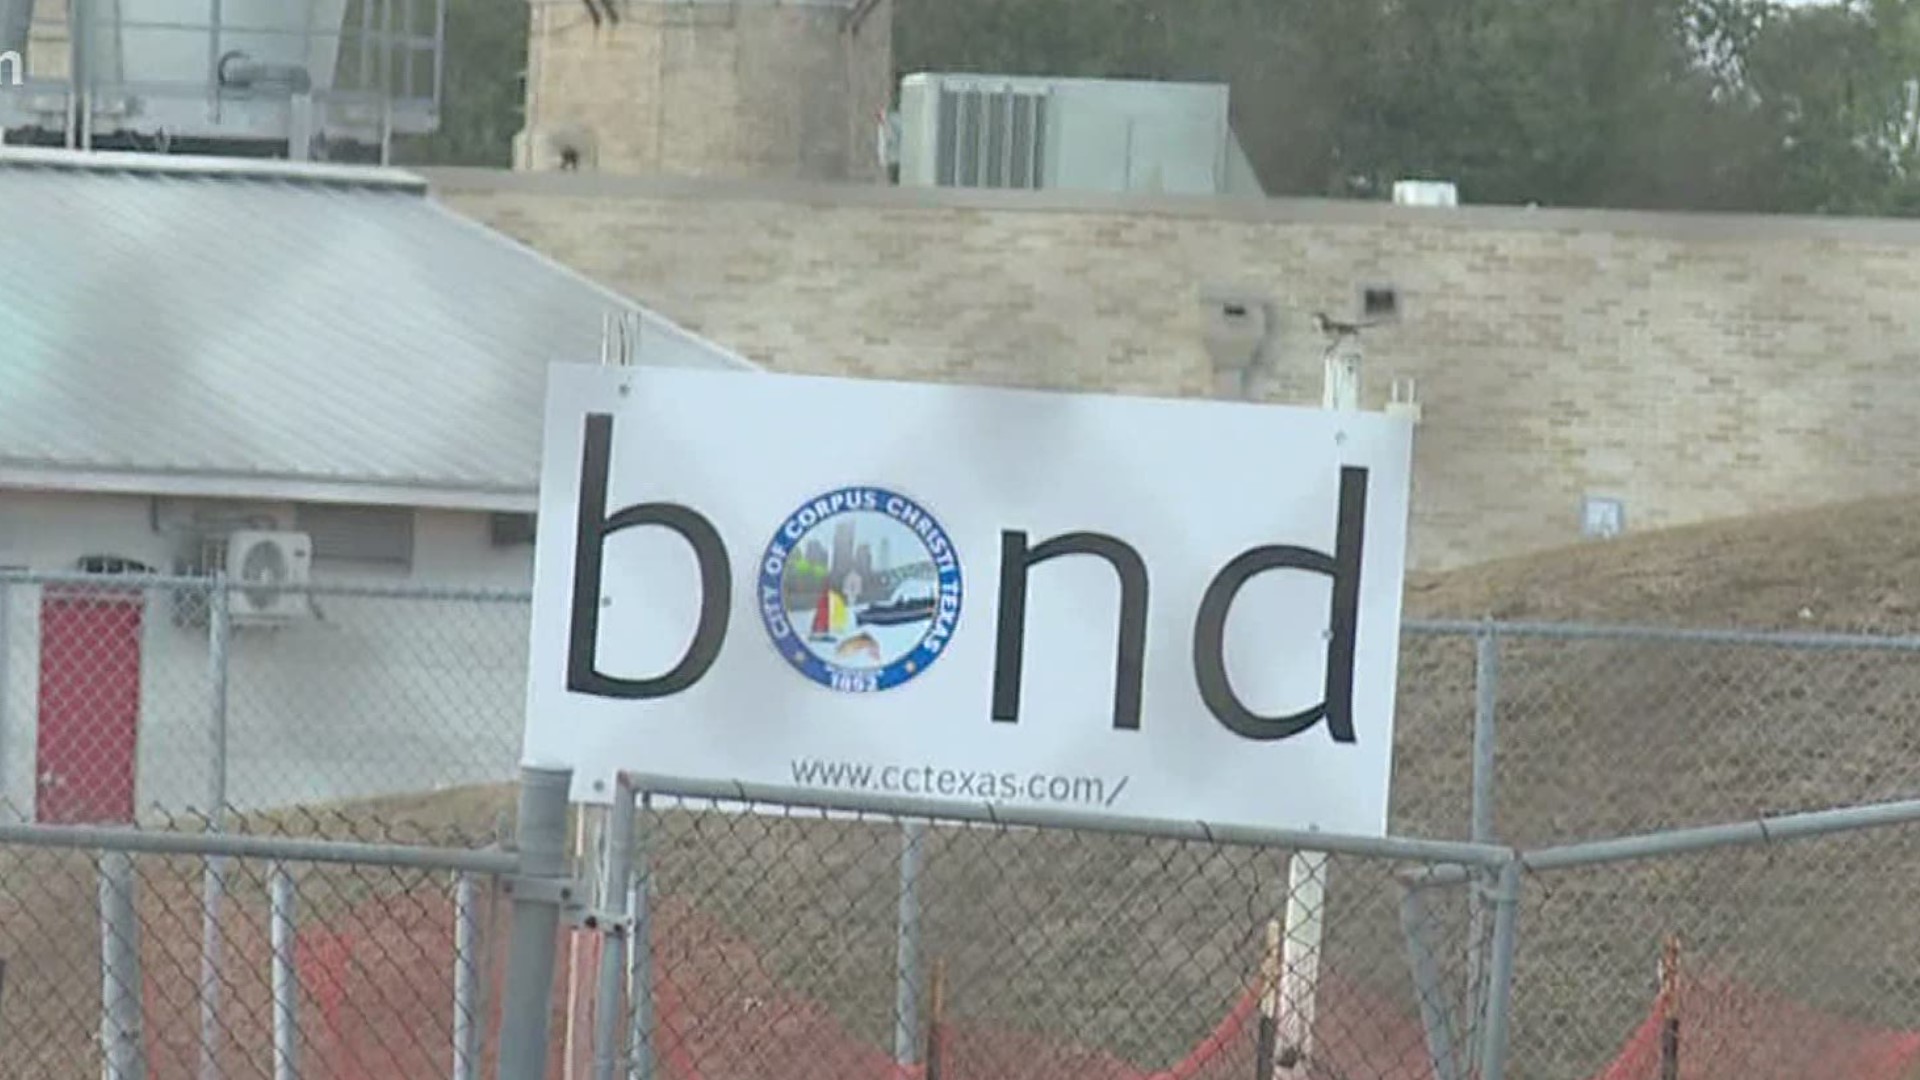 The 2018 bond project kicked off Friday morning and is expected to be complete in September of 2022.